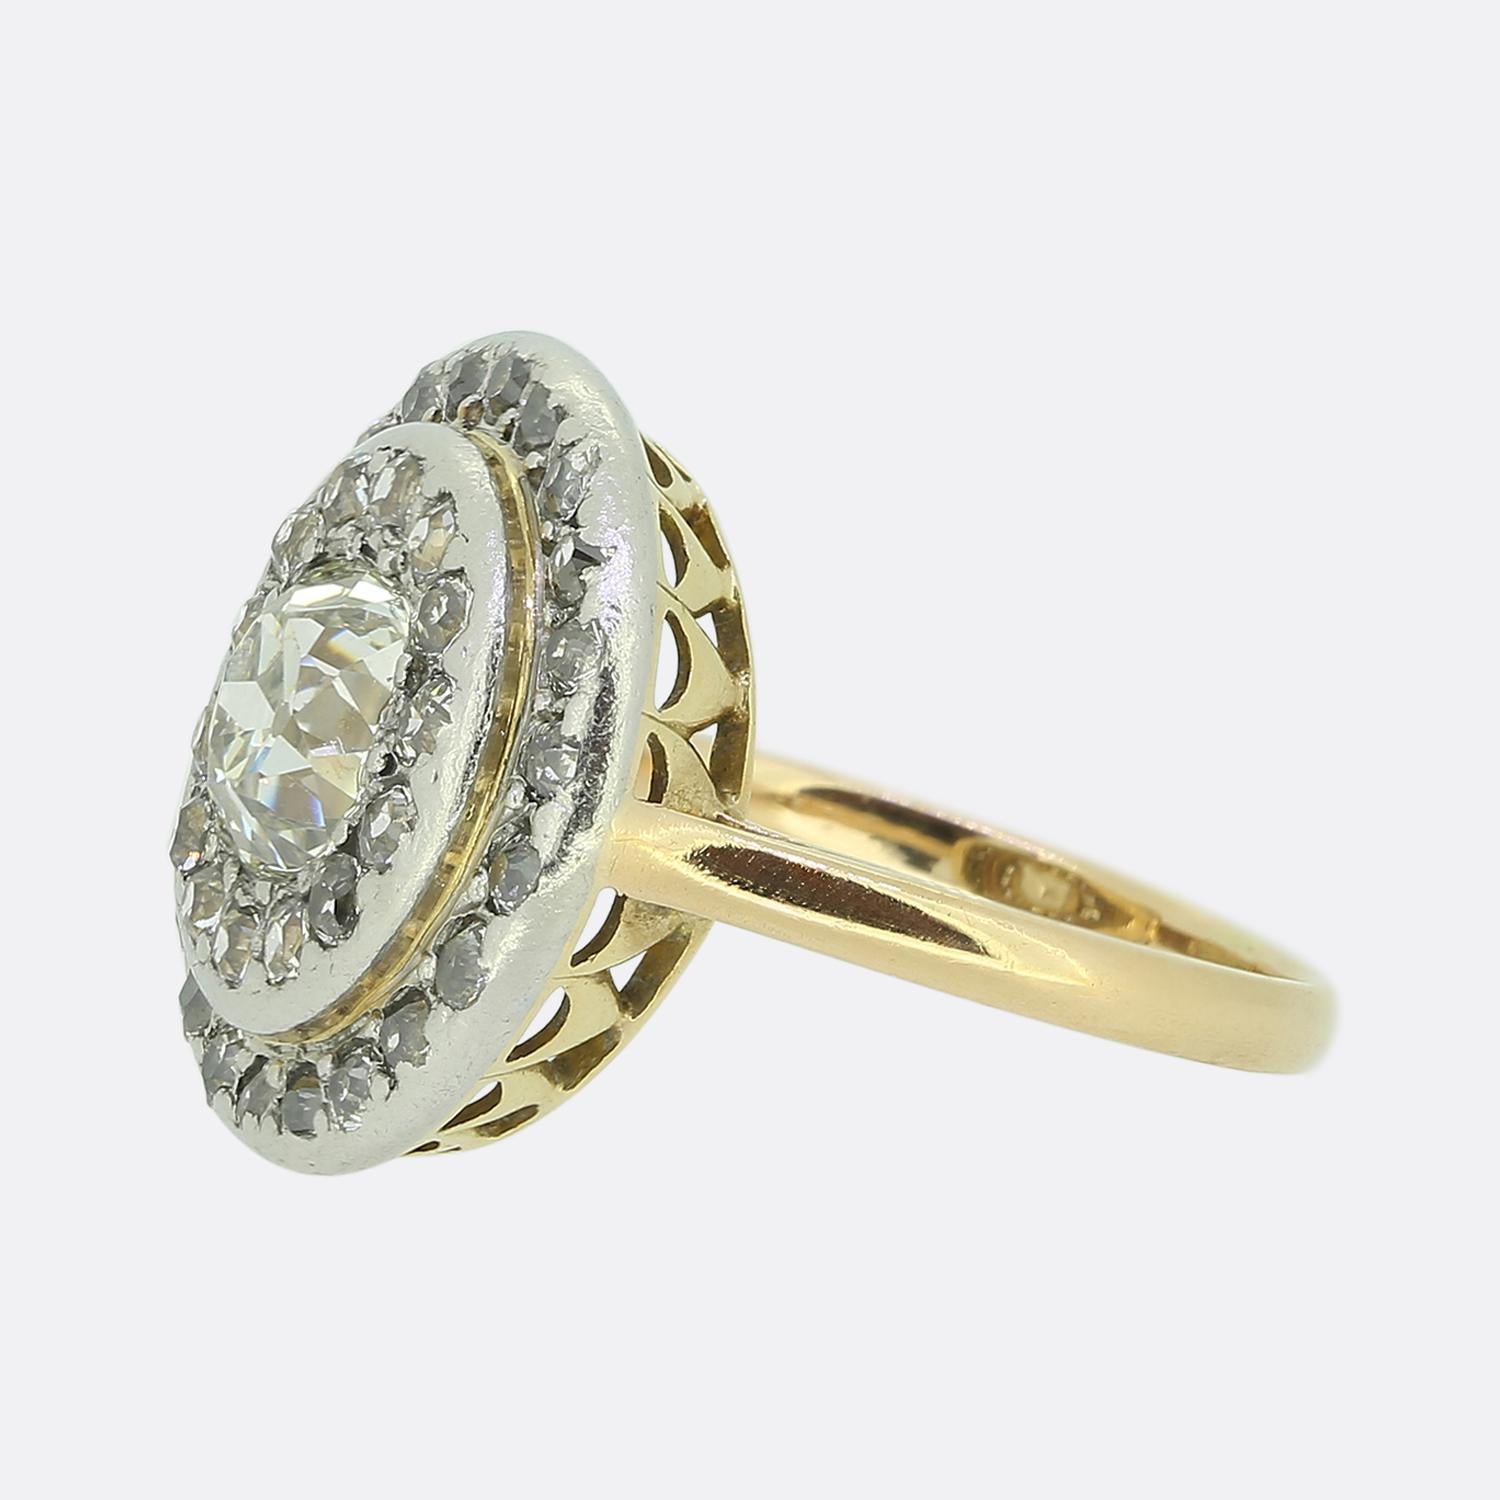 Here we have an outstanding diamond cluster ring dating back to the early stages of the 20th century. Taking centre stage is a remarkable 1.10ct old cushion cut diamond which sits slightly risen amidst a double halo of chunky round faceted old cut